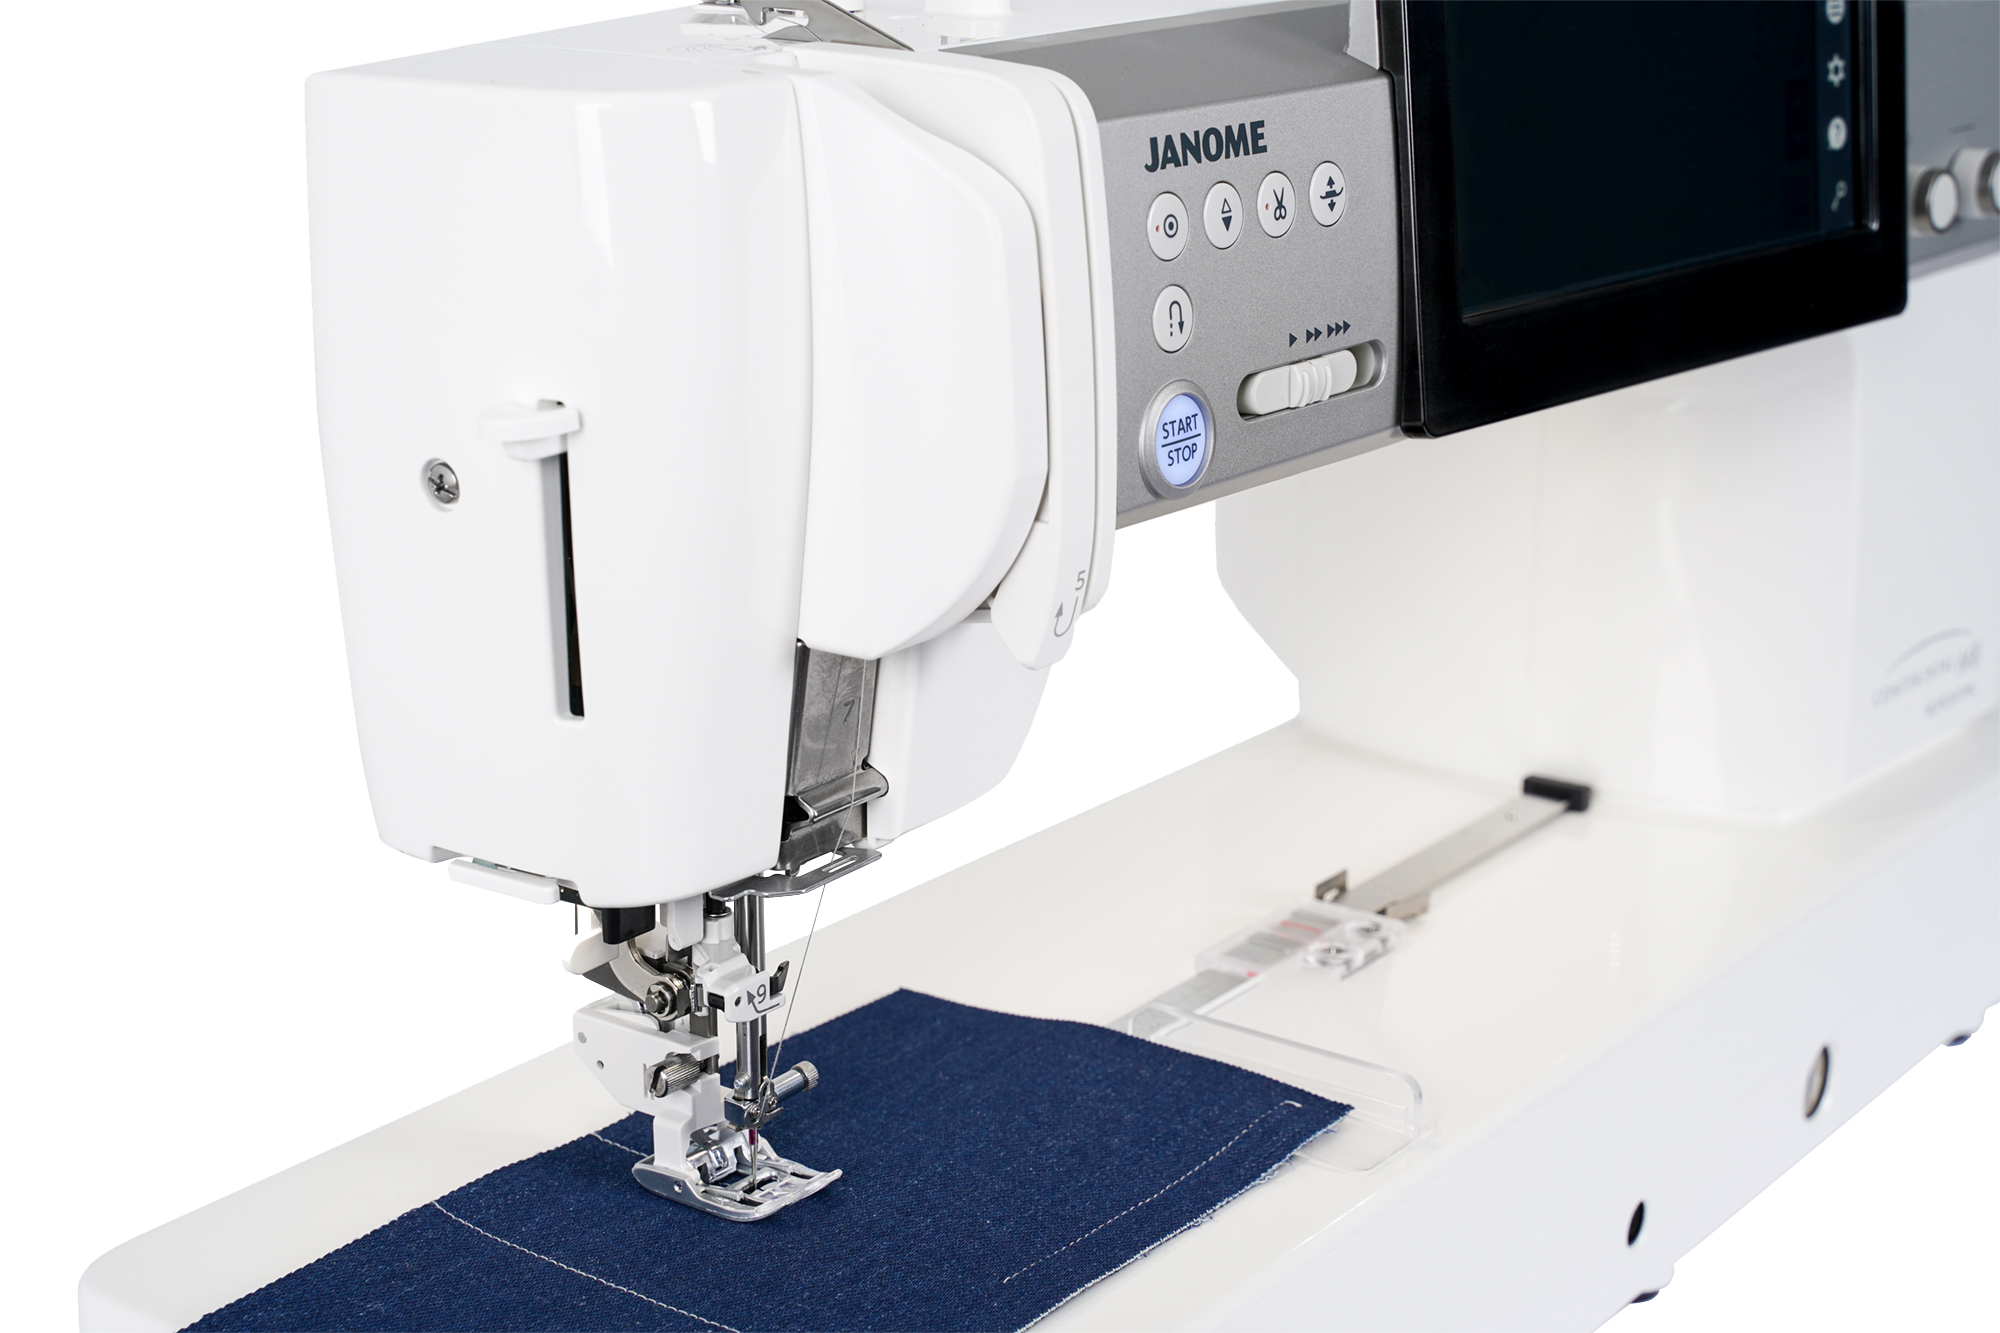 Janome Continental M8 Professional Sewing Machine for Sale at World Weidner